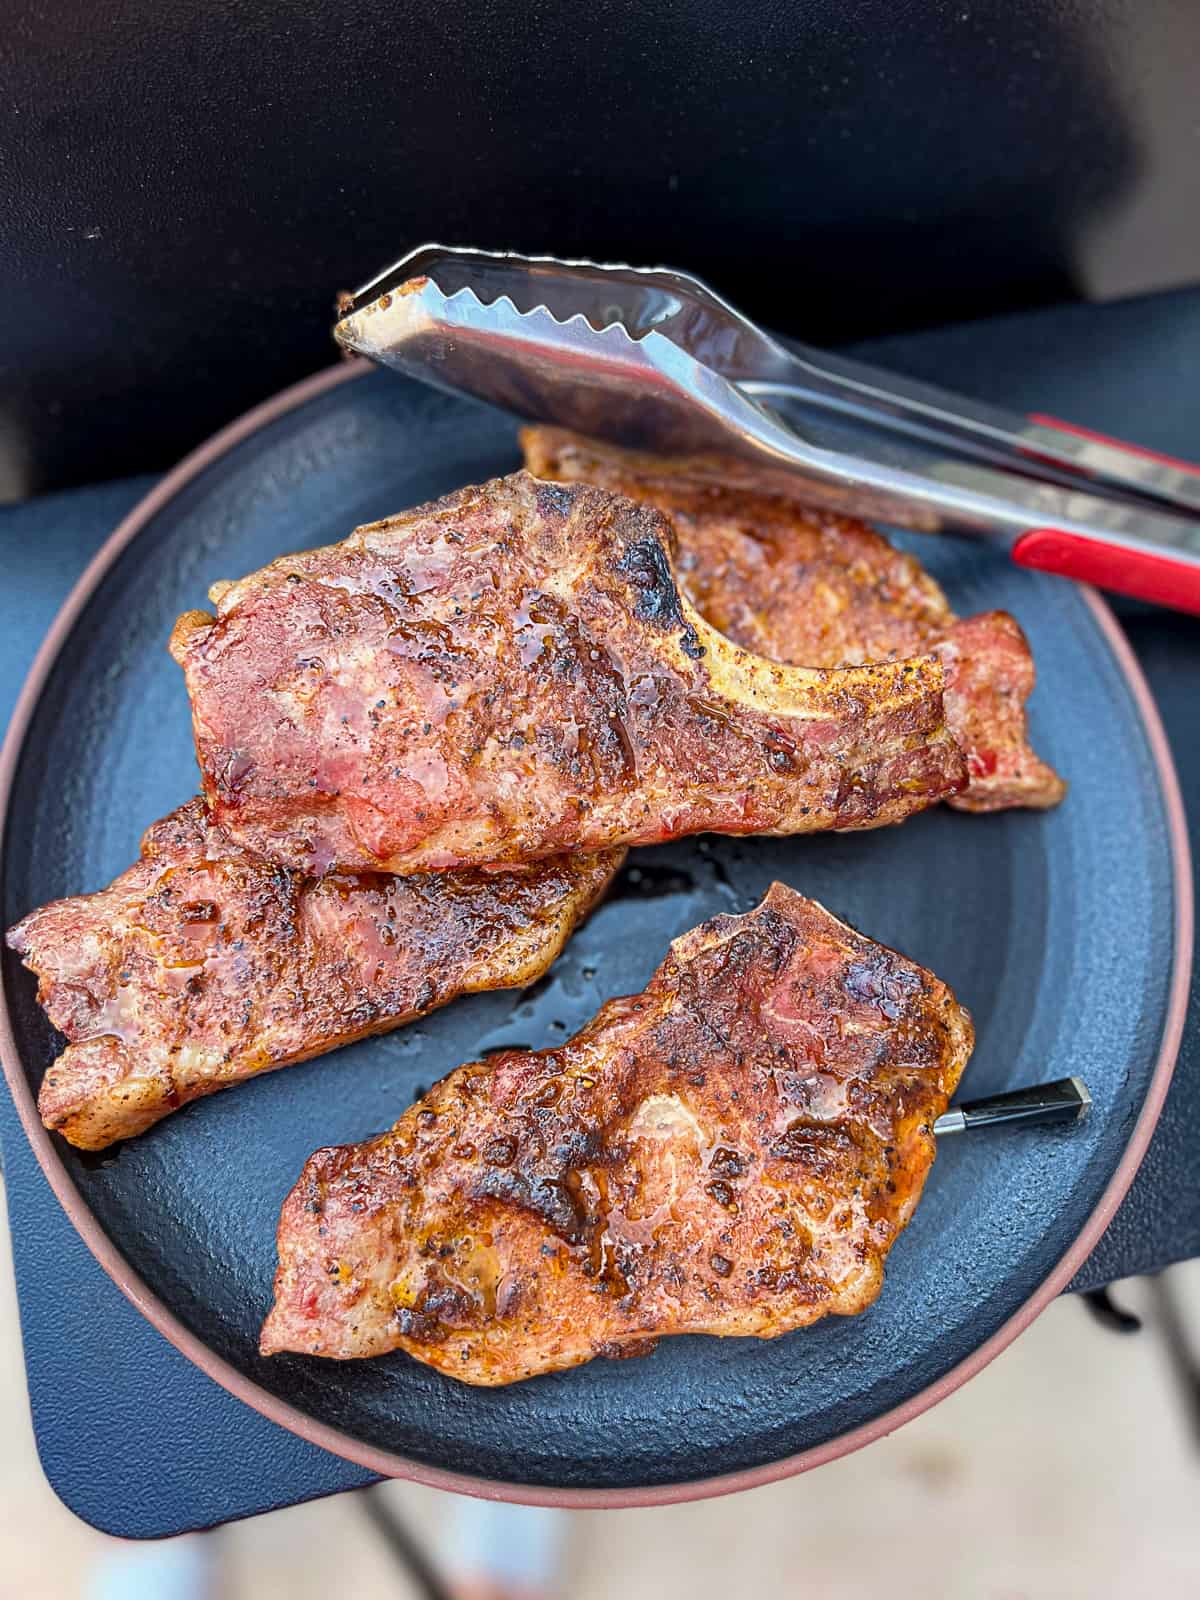 Juicy smoked Traeger Pork Chops bone in on a dinner plate with tongs